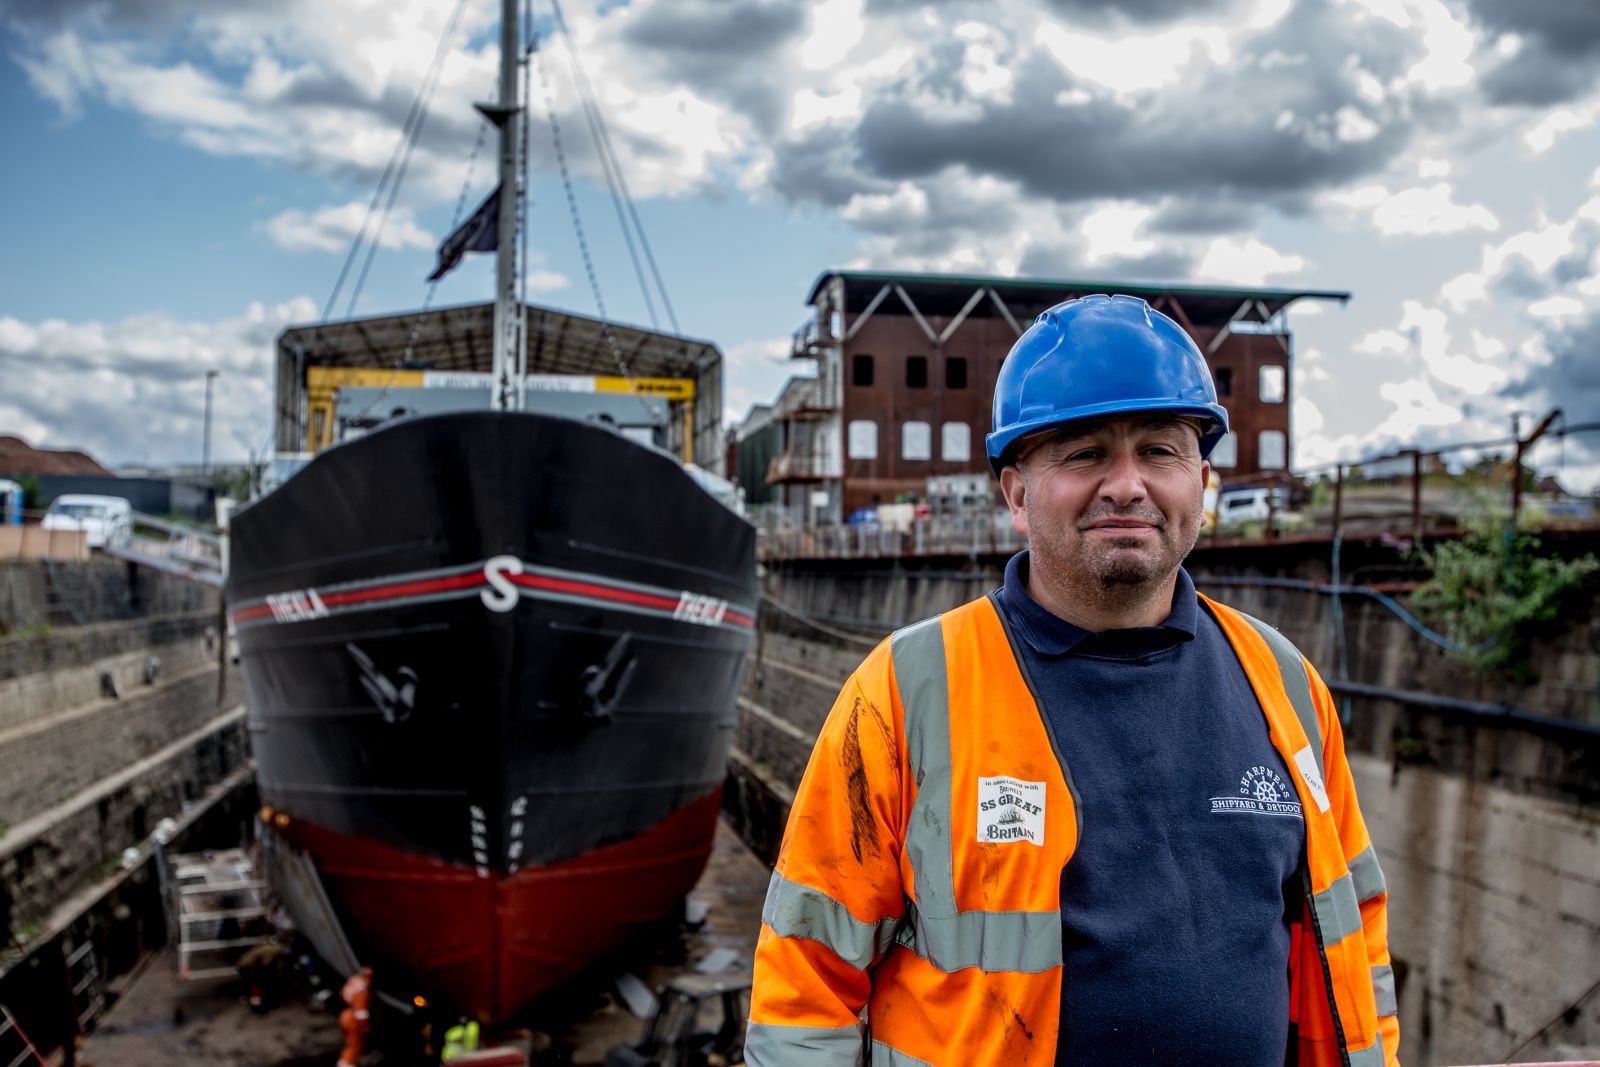 Work on the Thekla boat is now complete. Image: David Jeffery-Hughes